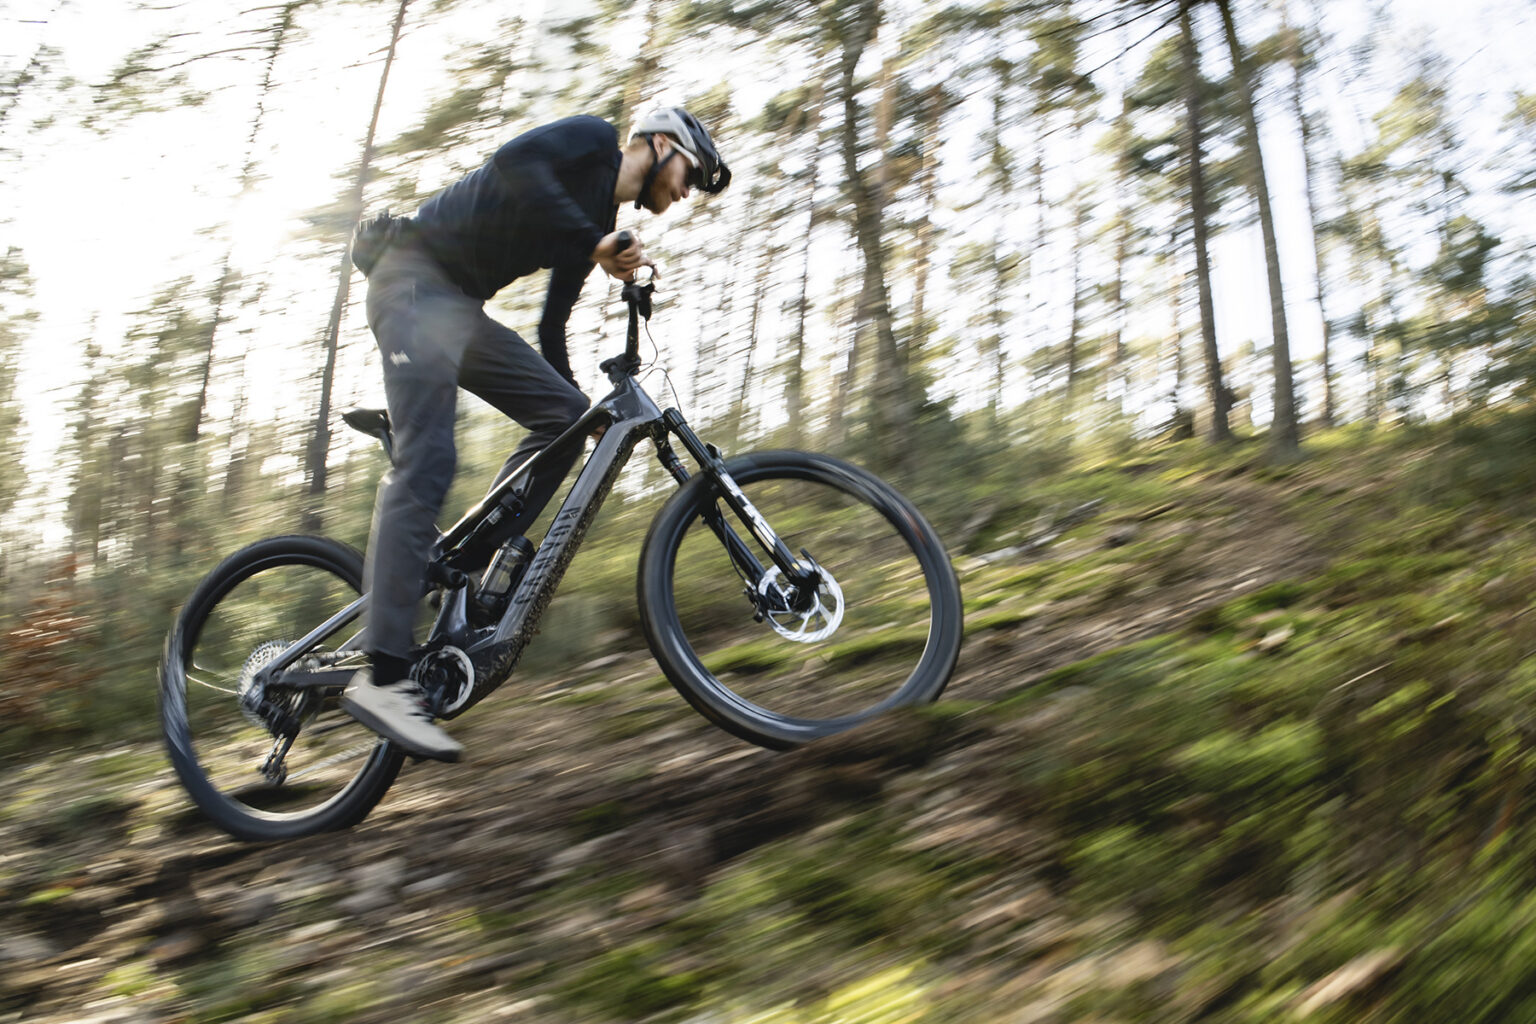 Canyon Neuron:ONfly lightweight 140mm carbon trail ebike with Bosch SX motor, climbing